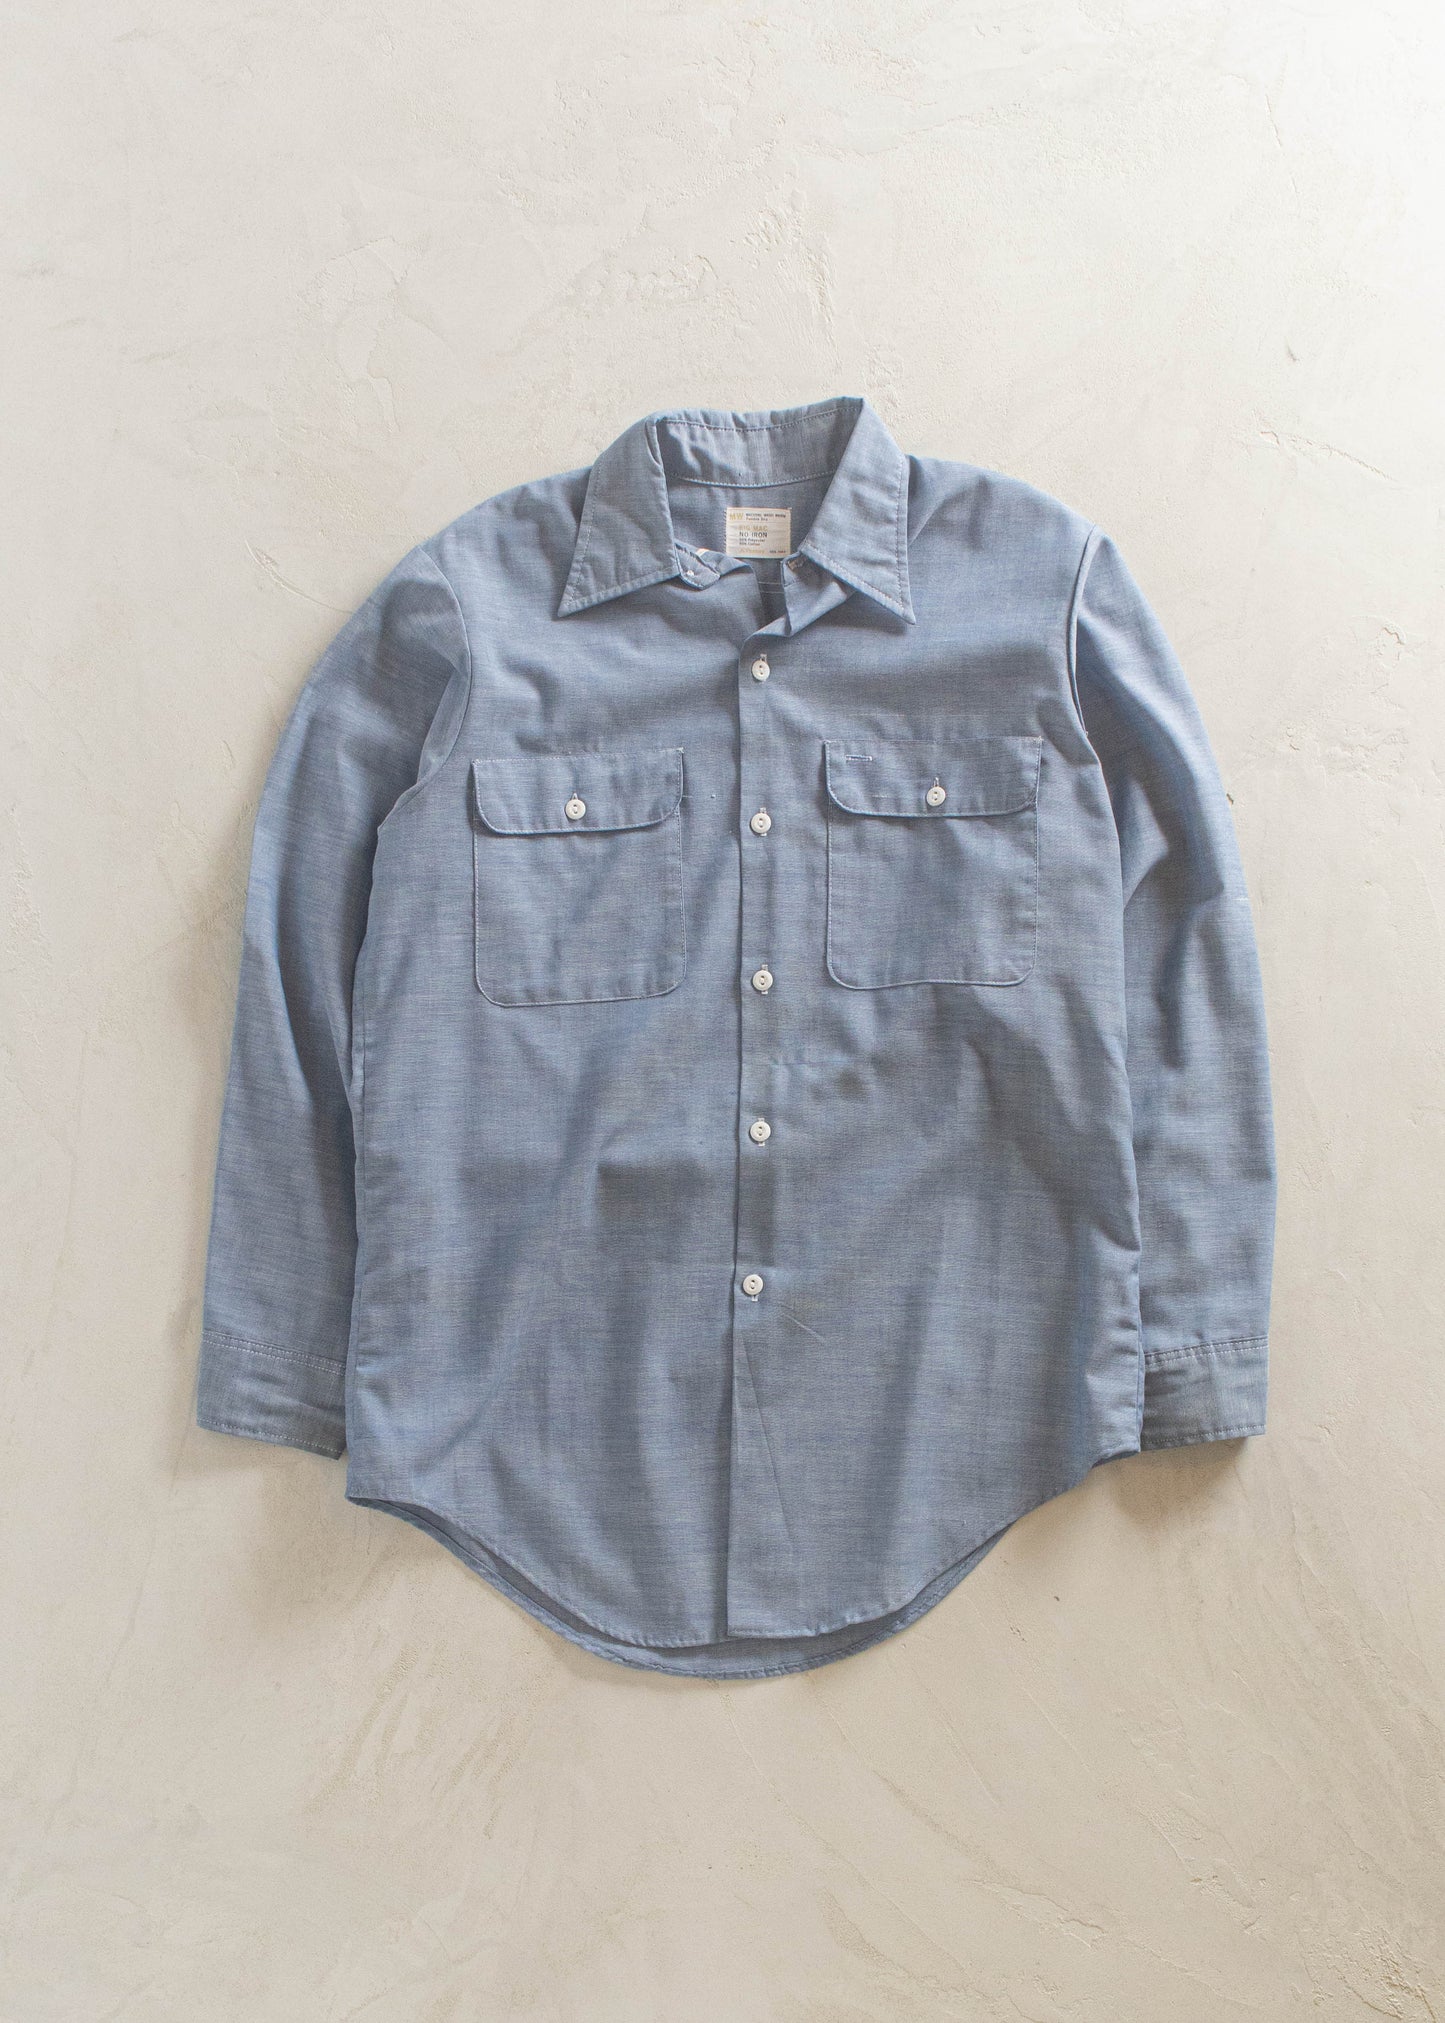 1970s Big Mac Selvedge Chambray Long Sleeve Button Up Shirt Size XS/S